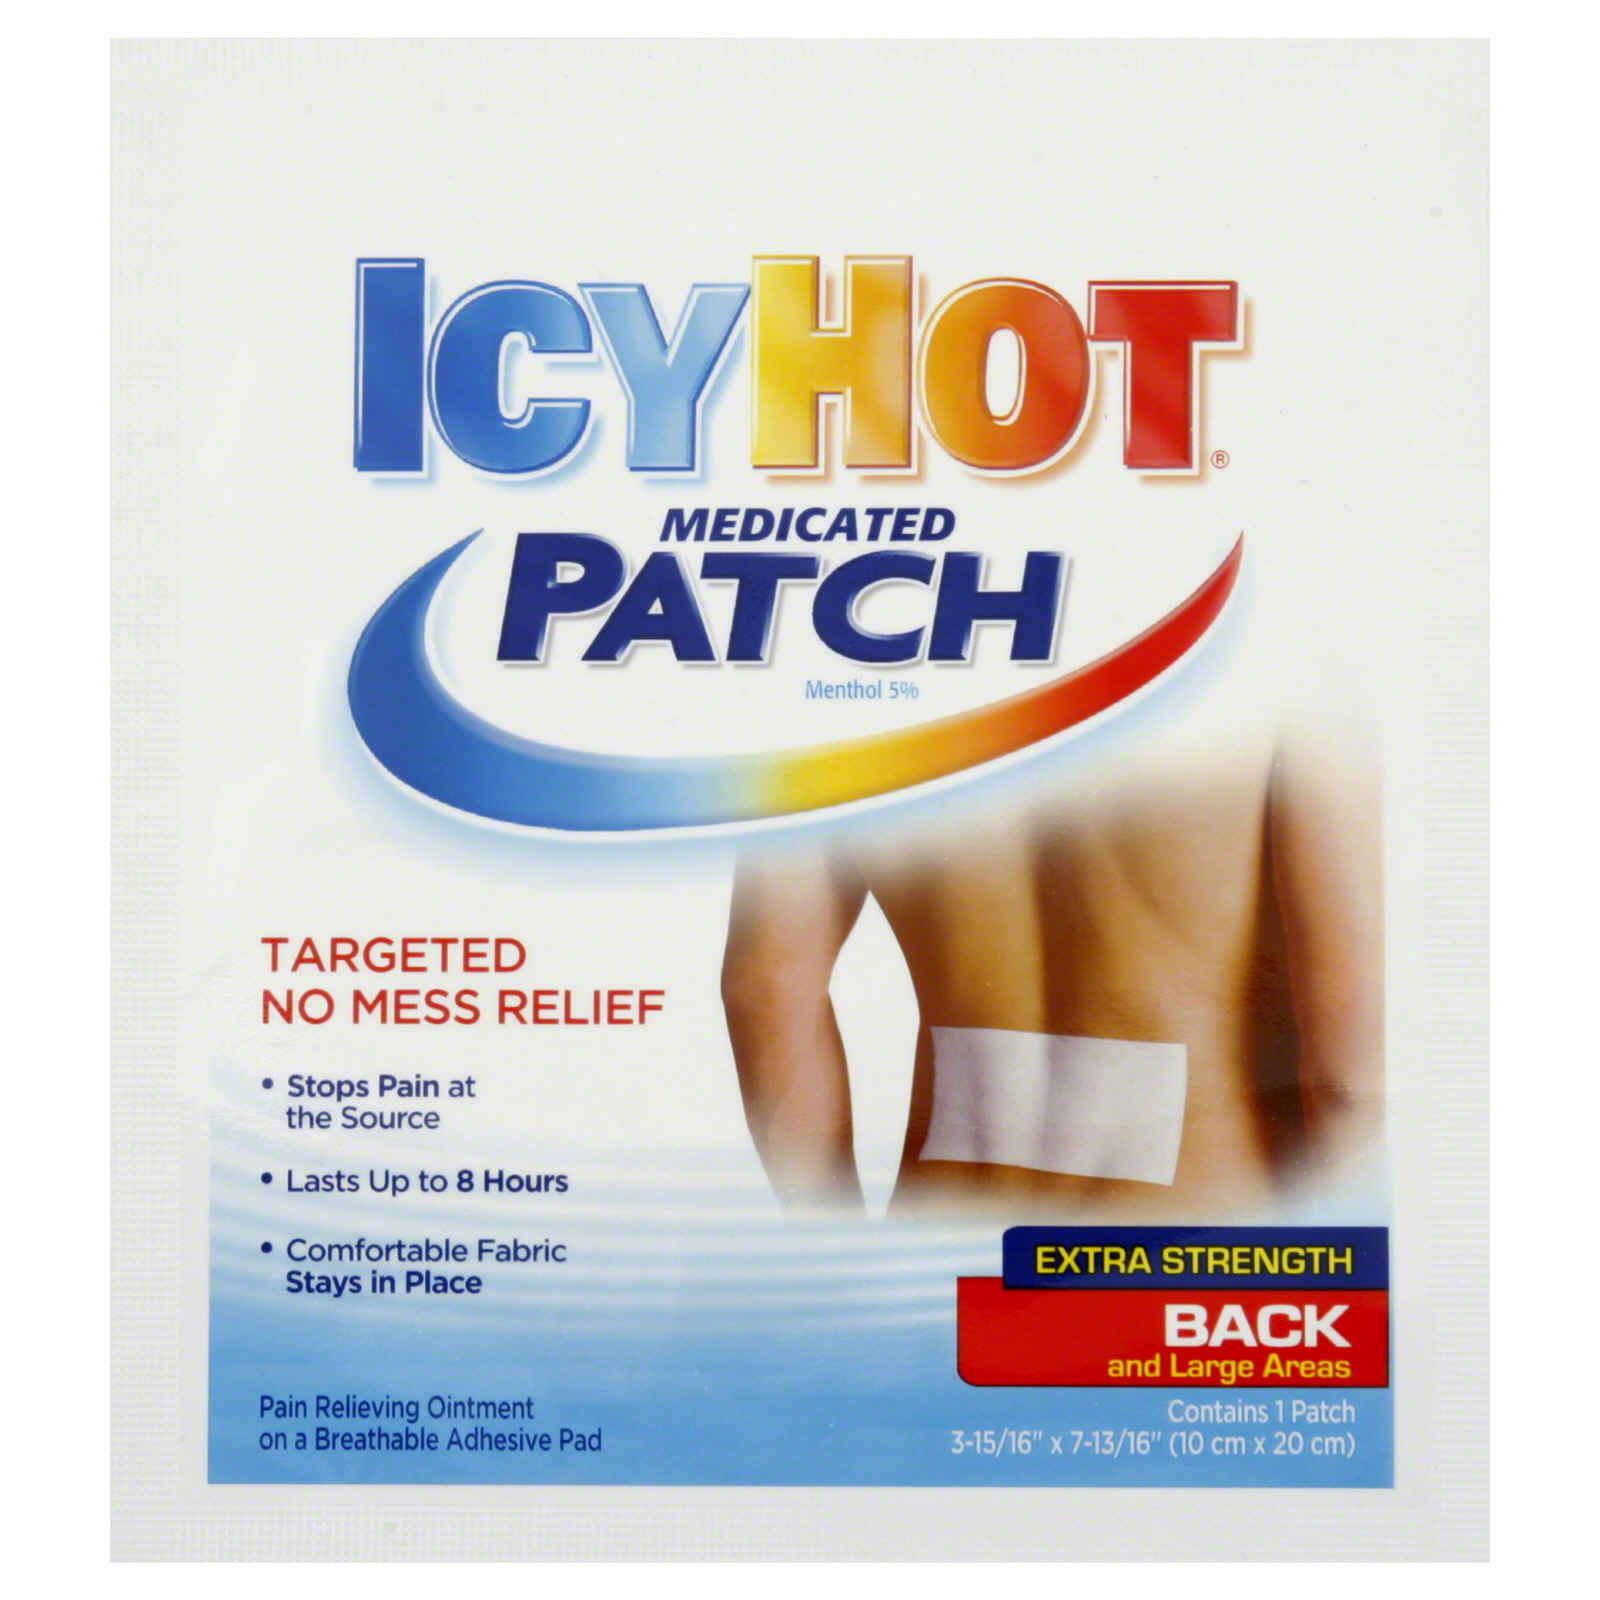 Icy Hot Medicated Patch, Extra Strength, Back & Large Areas, 1 patch